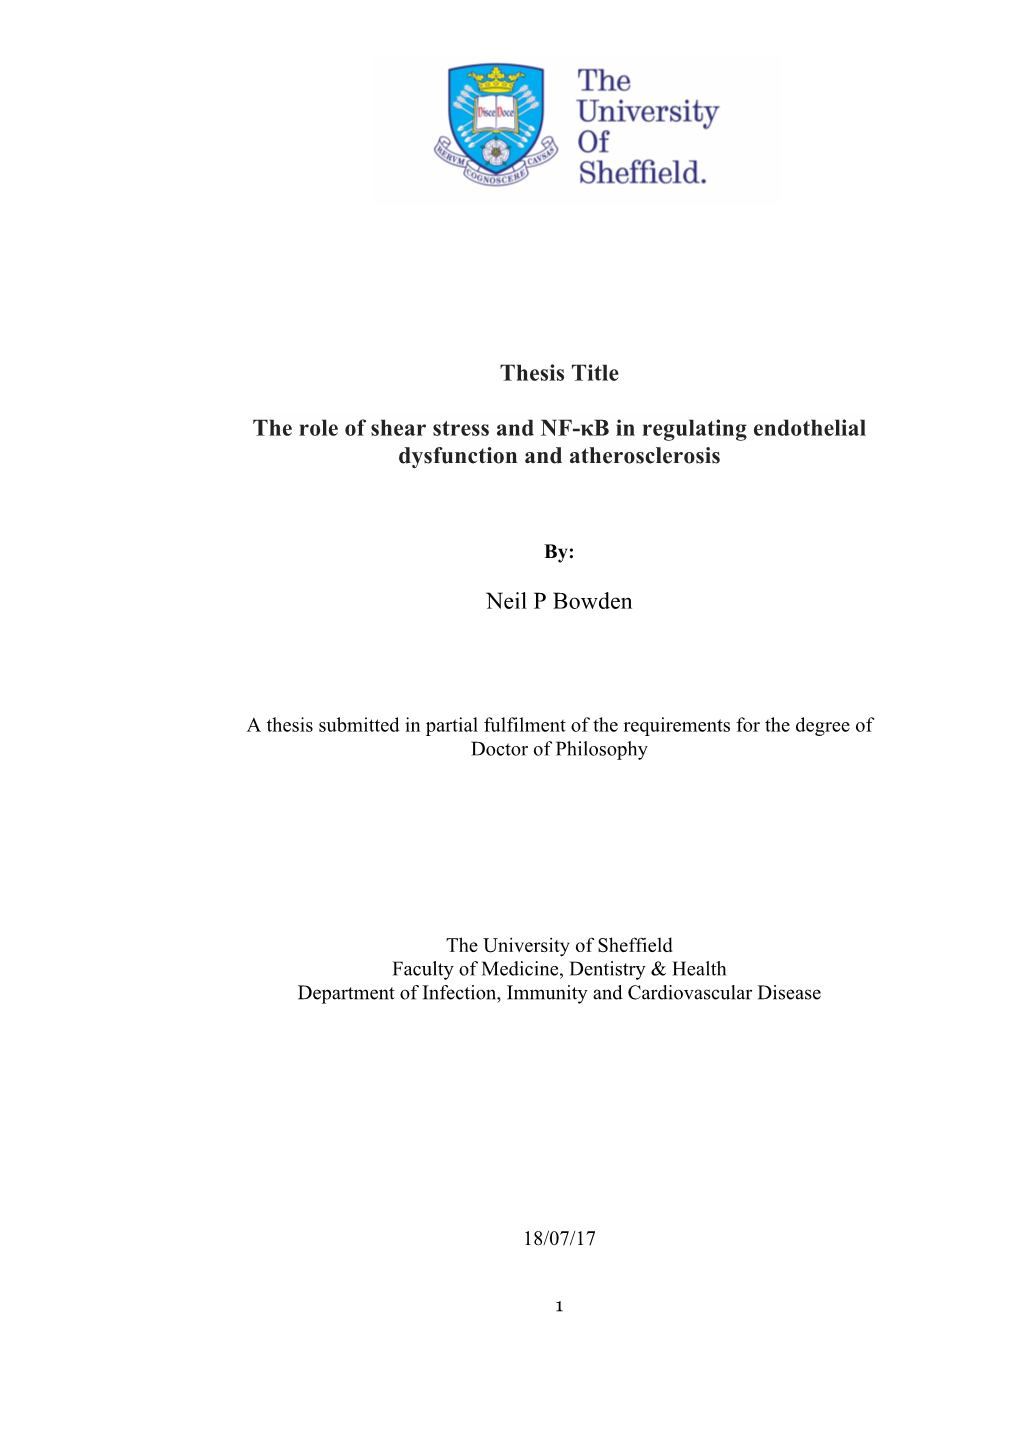 Thesis Title the Role of Shear Stress and NF-Κb in Regulating Endothelial Dysfunction and Atherosclerosis Neil P Bowden